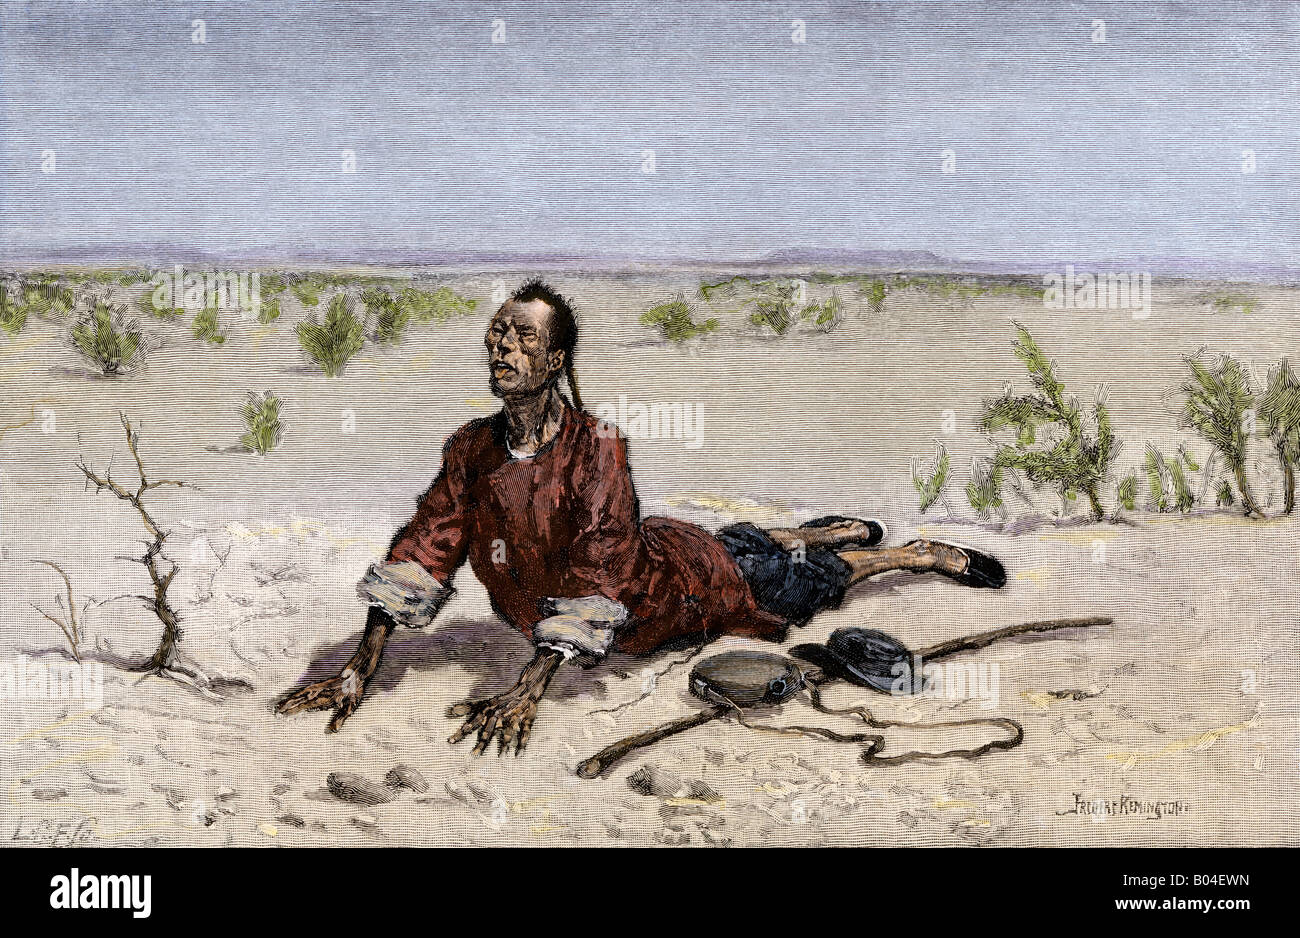 Chinese immigrant dying of thirst in the Mohave Desert 1800s. Hand-colored woodcut of a Frederic Remington illustration Stock Photo